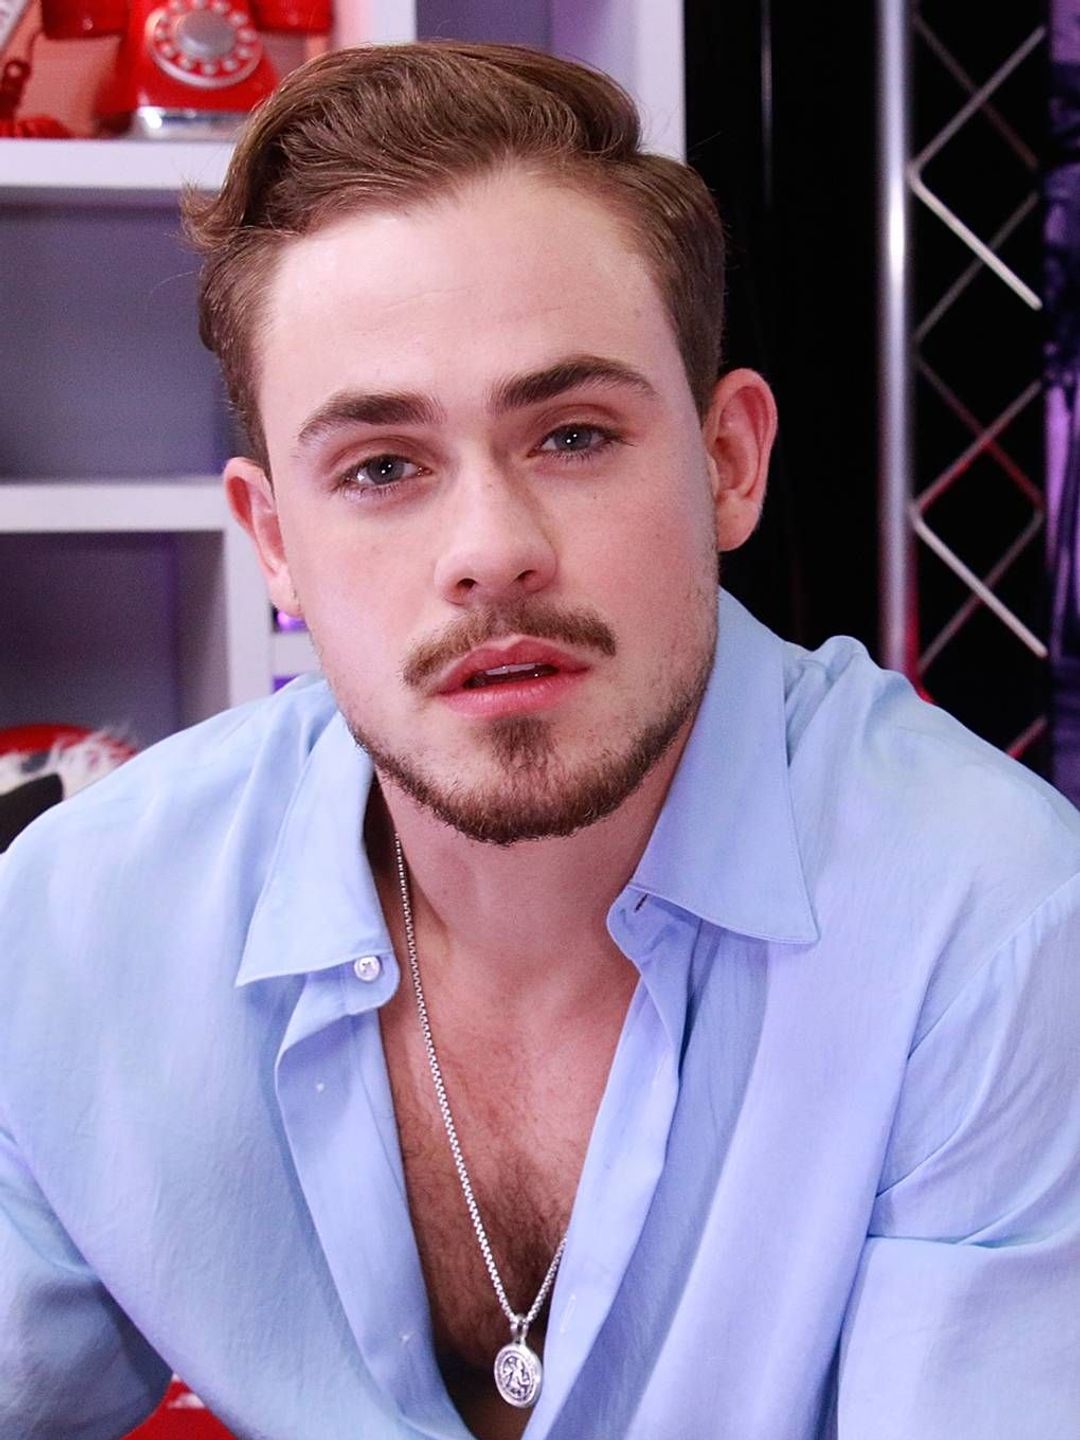 Dacre Montgomery who is his father